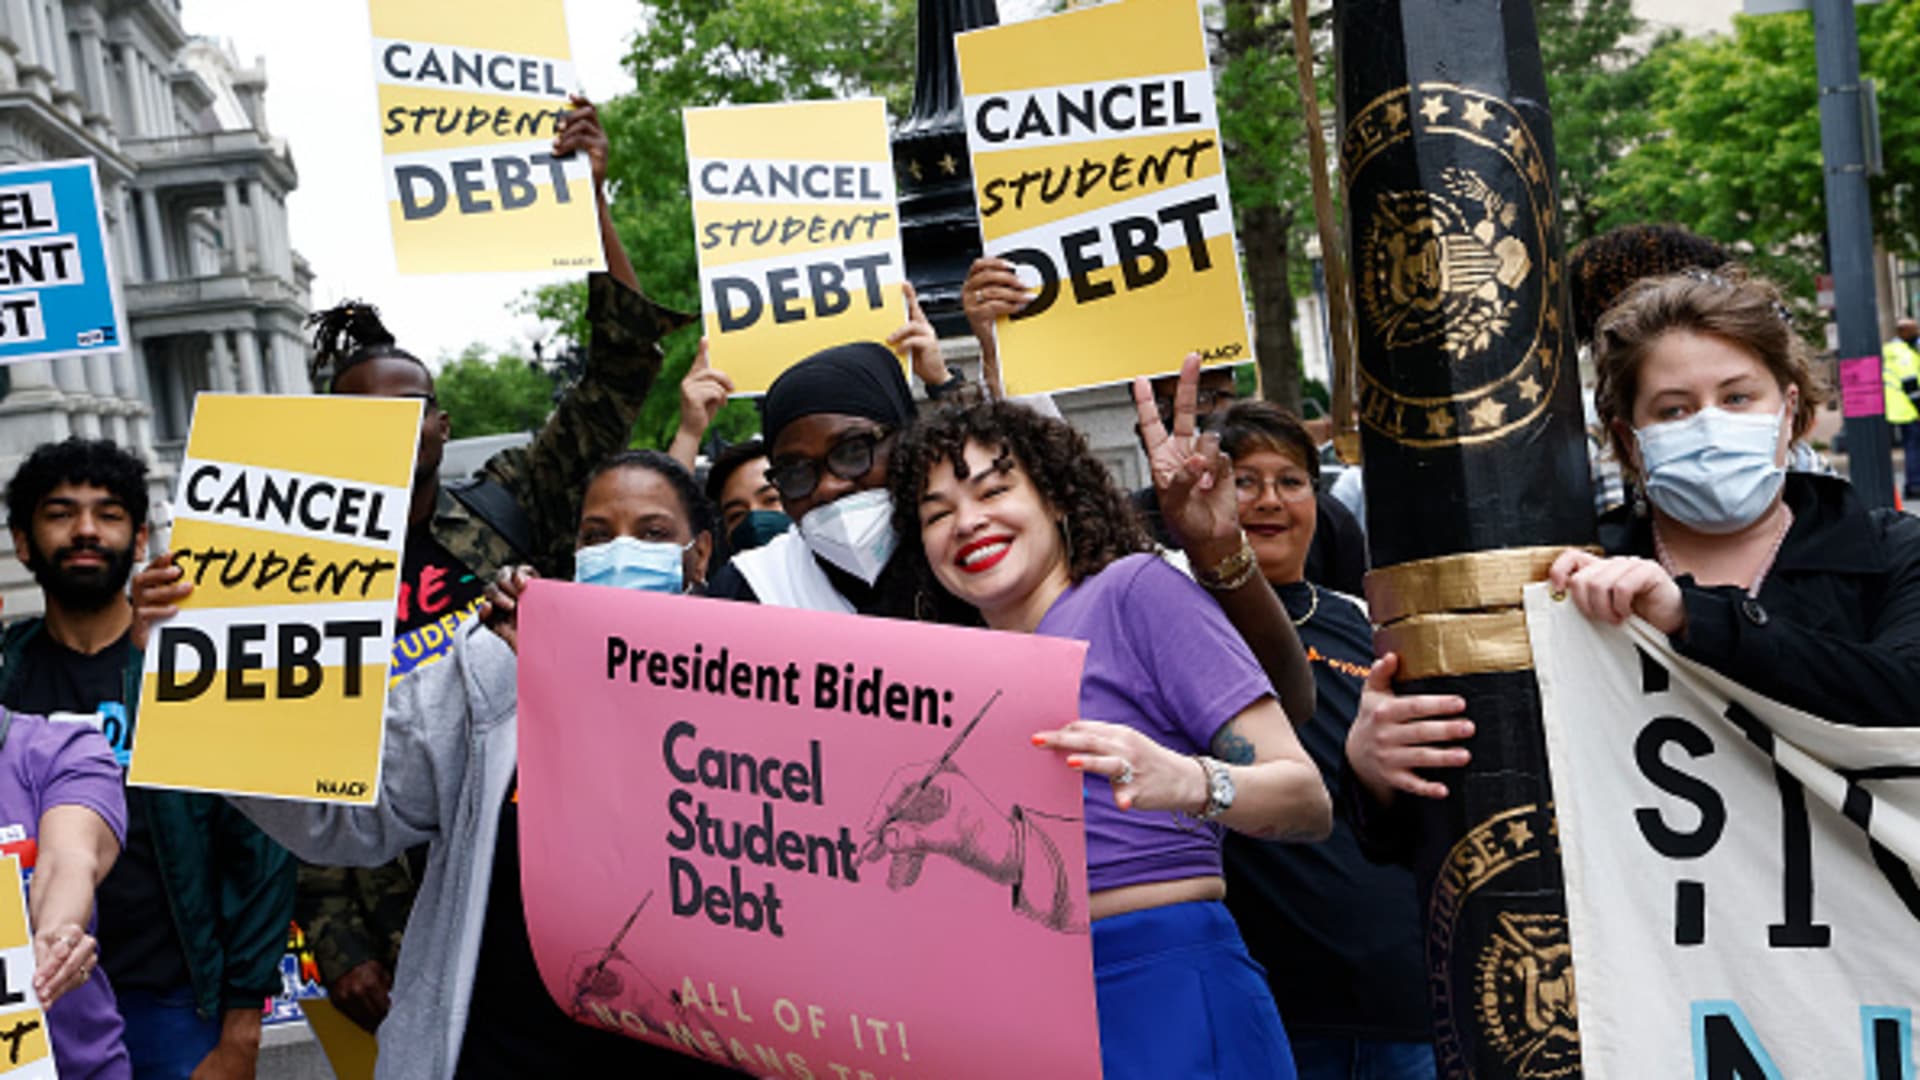 CNBC readers react to chance of $10,000 in student loan forgiveness